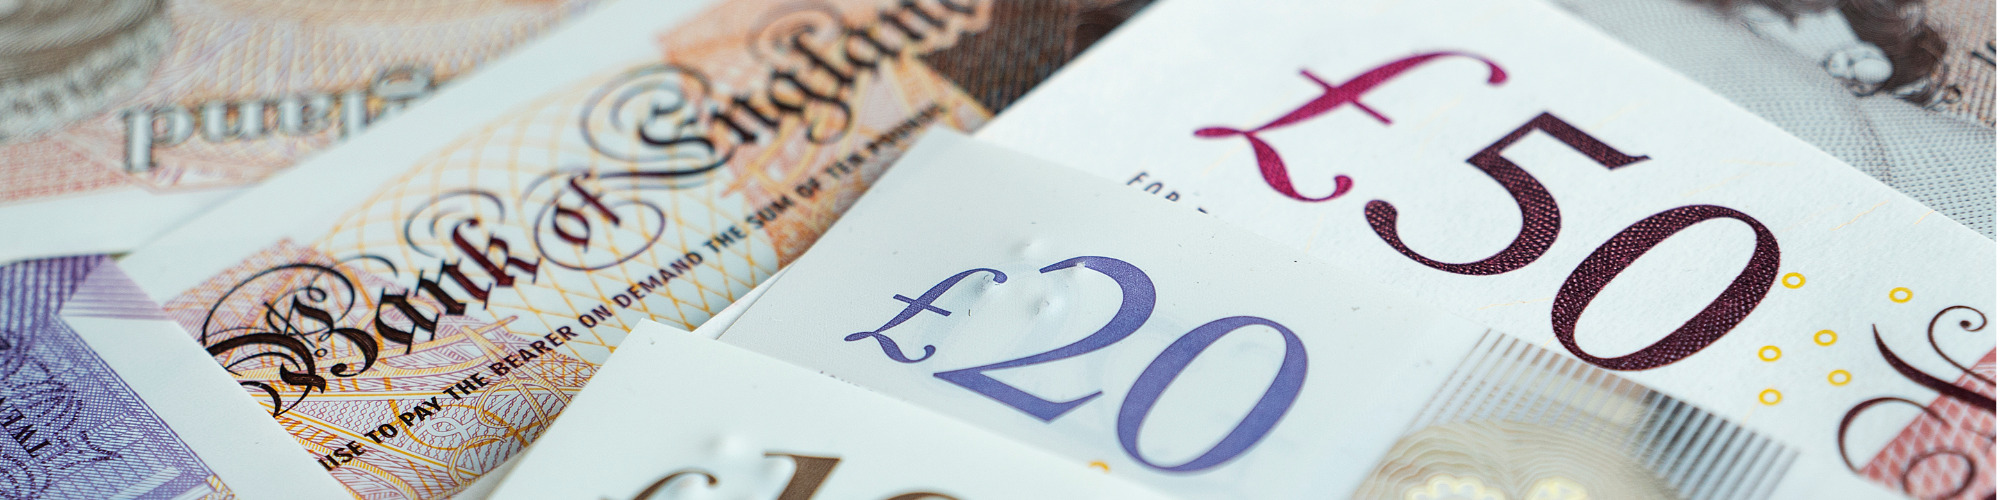 Protecting Consumers from Rogue Financial Promotions - The FCA’s Proposed New Rules